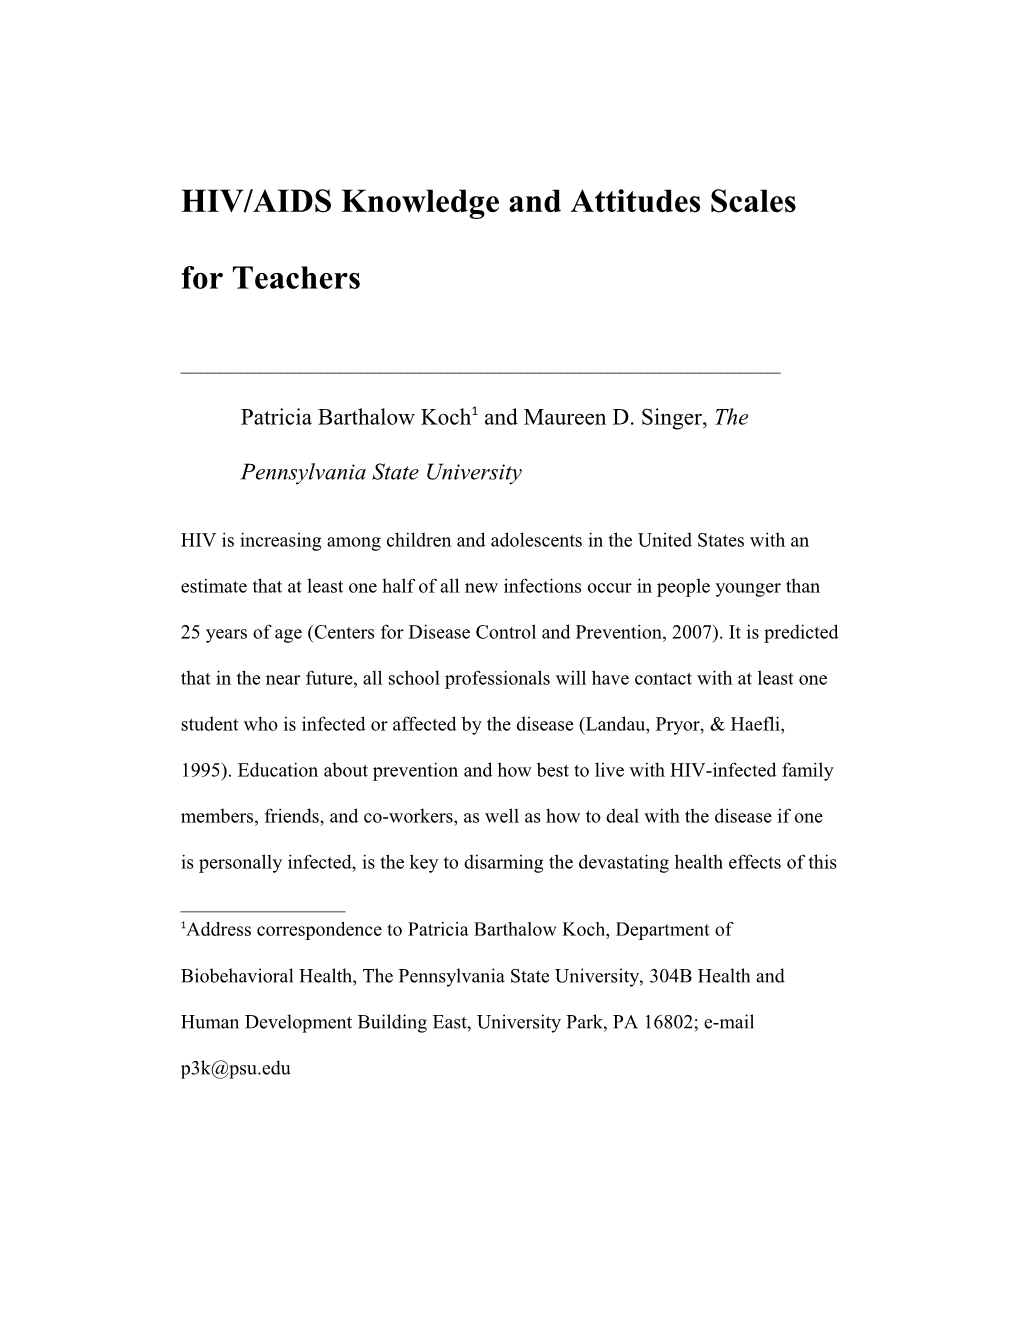 HIV/AIDS Knowledge and Attitudes Scales for Teachers